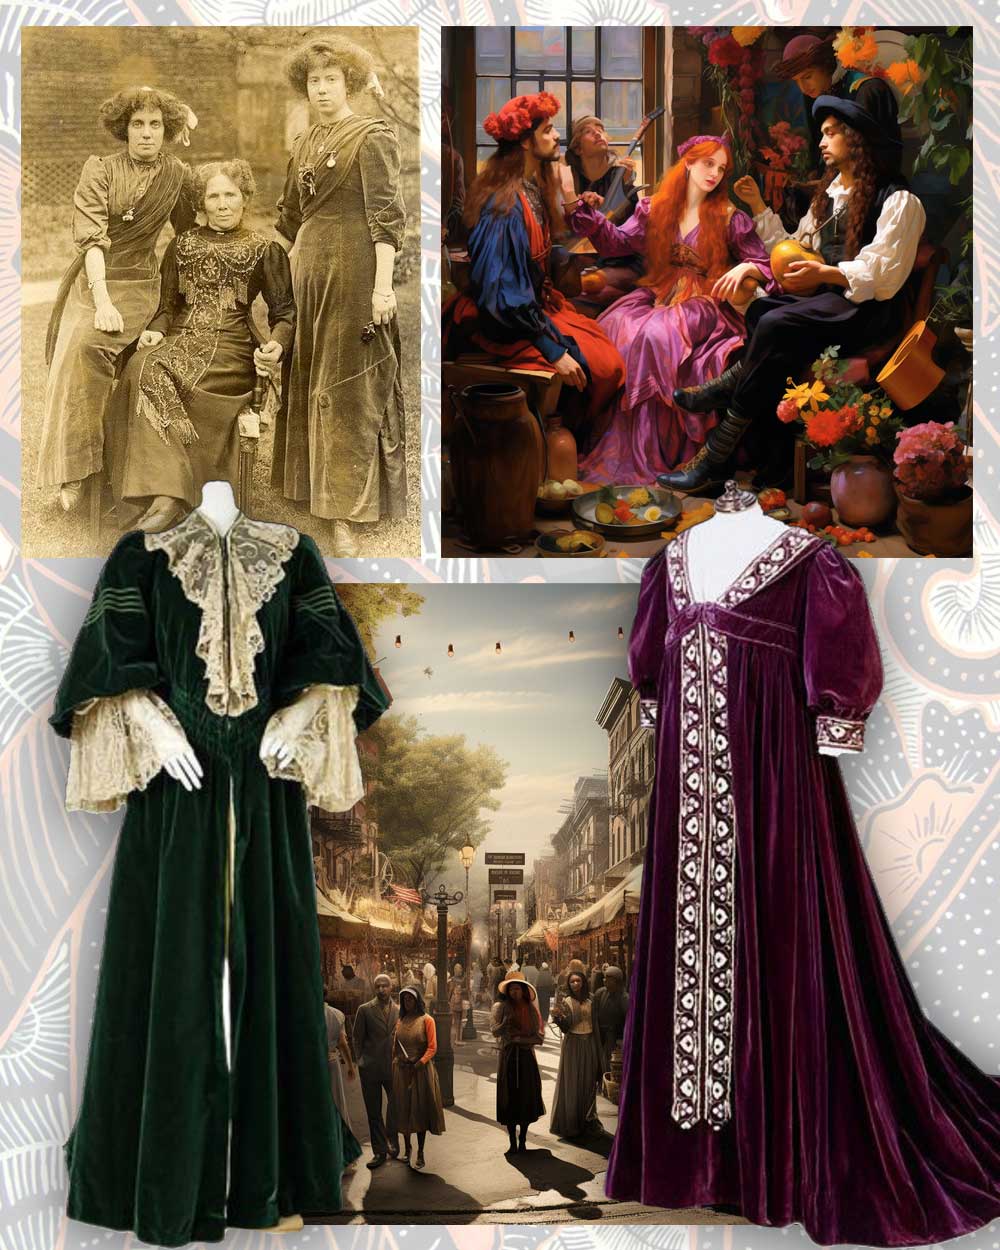 Aesthetic Movement and Bohemians in the 19th Century